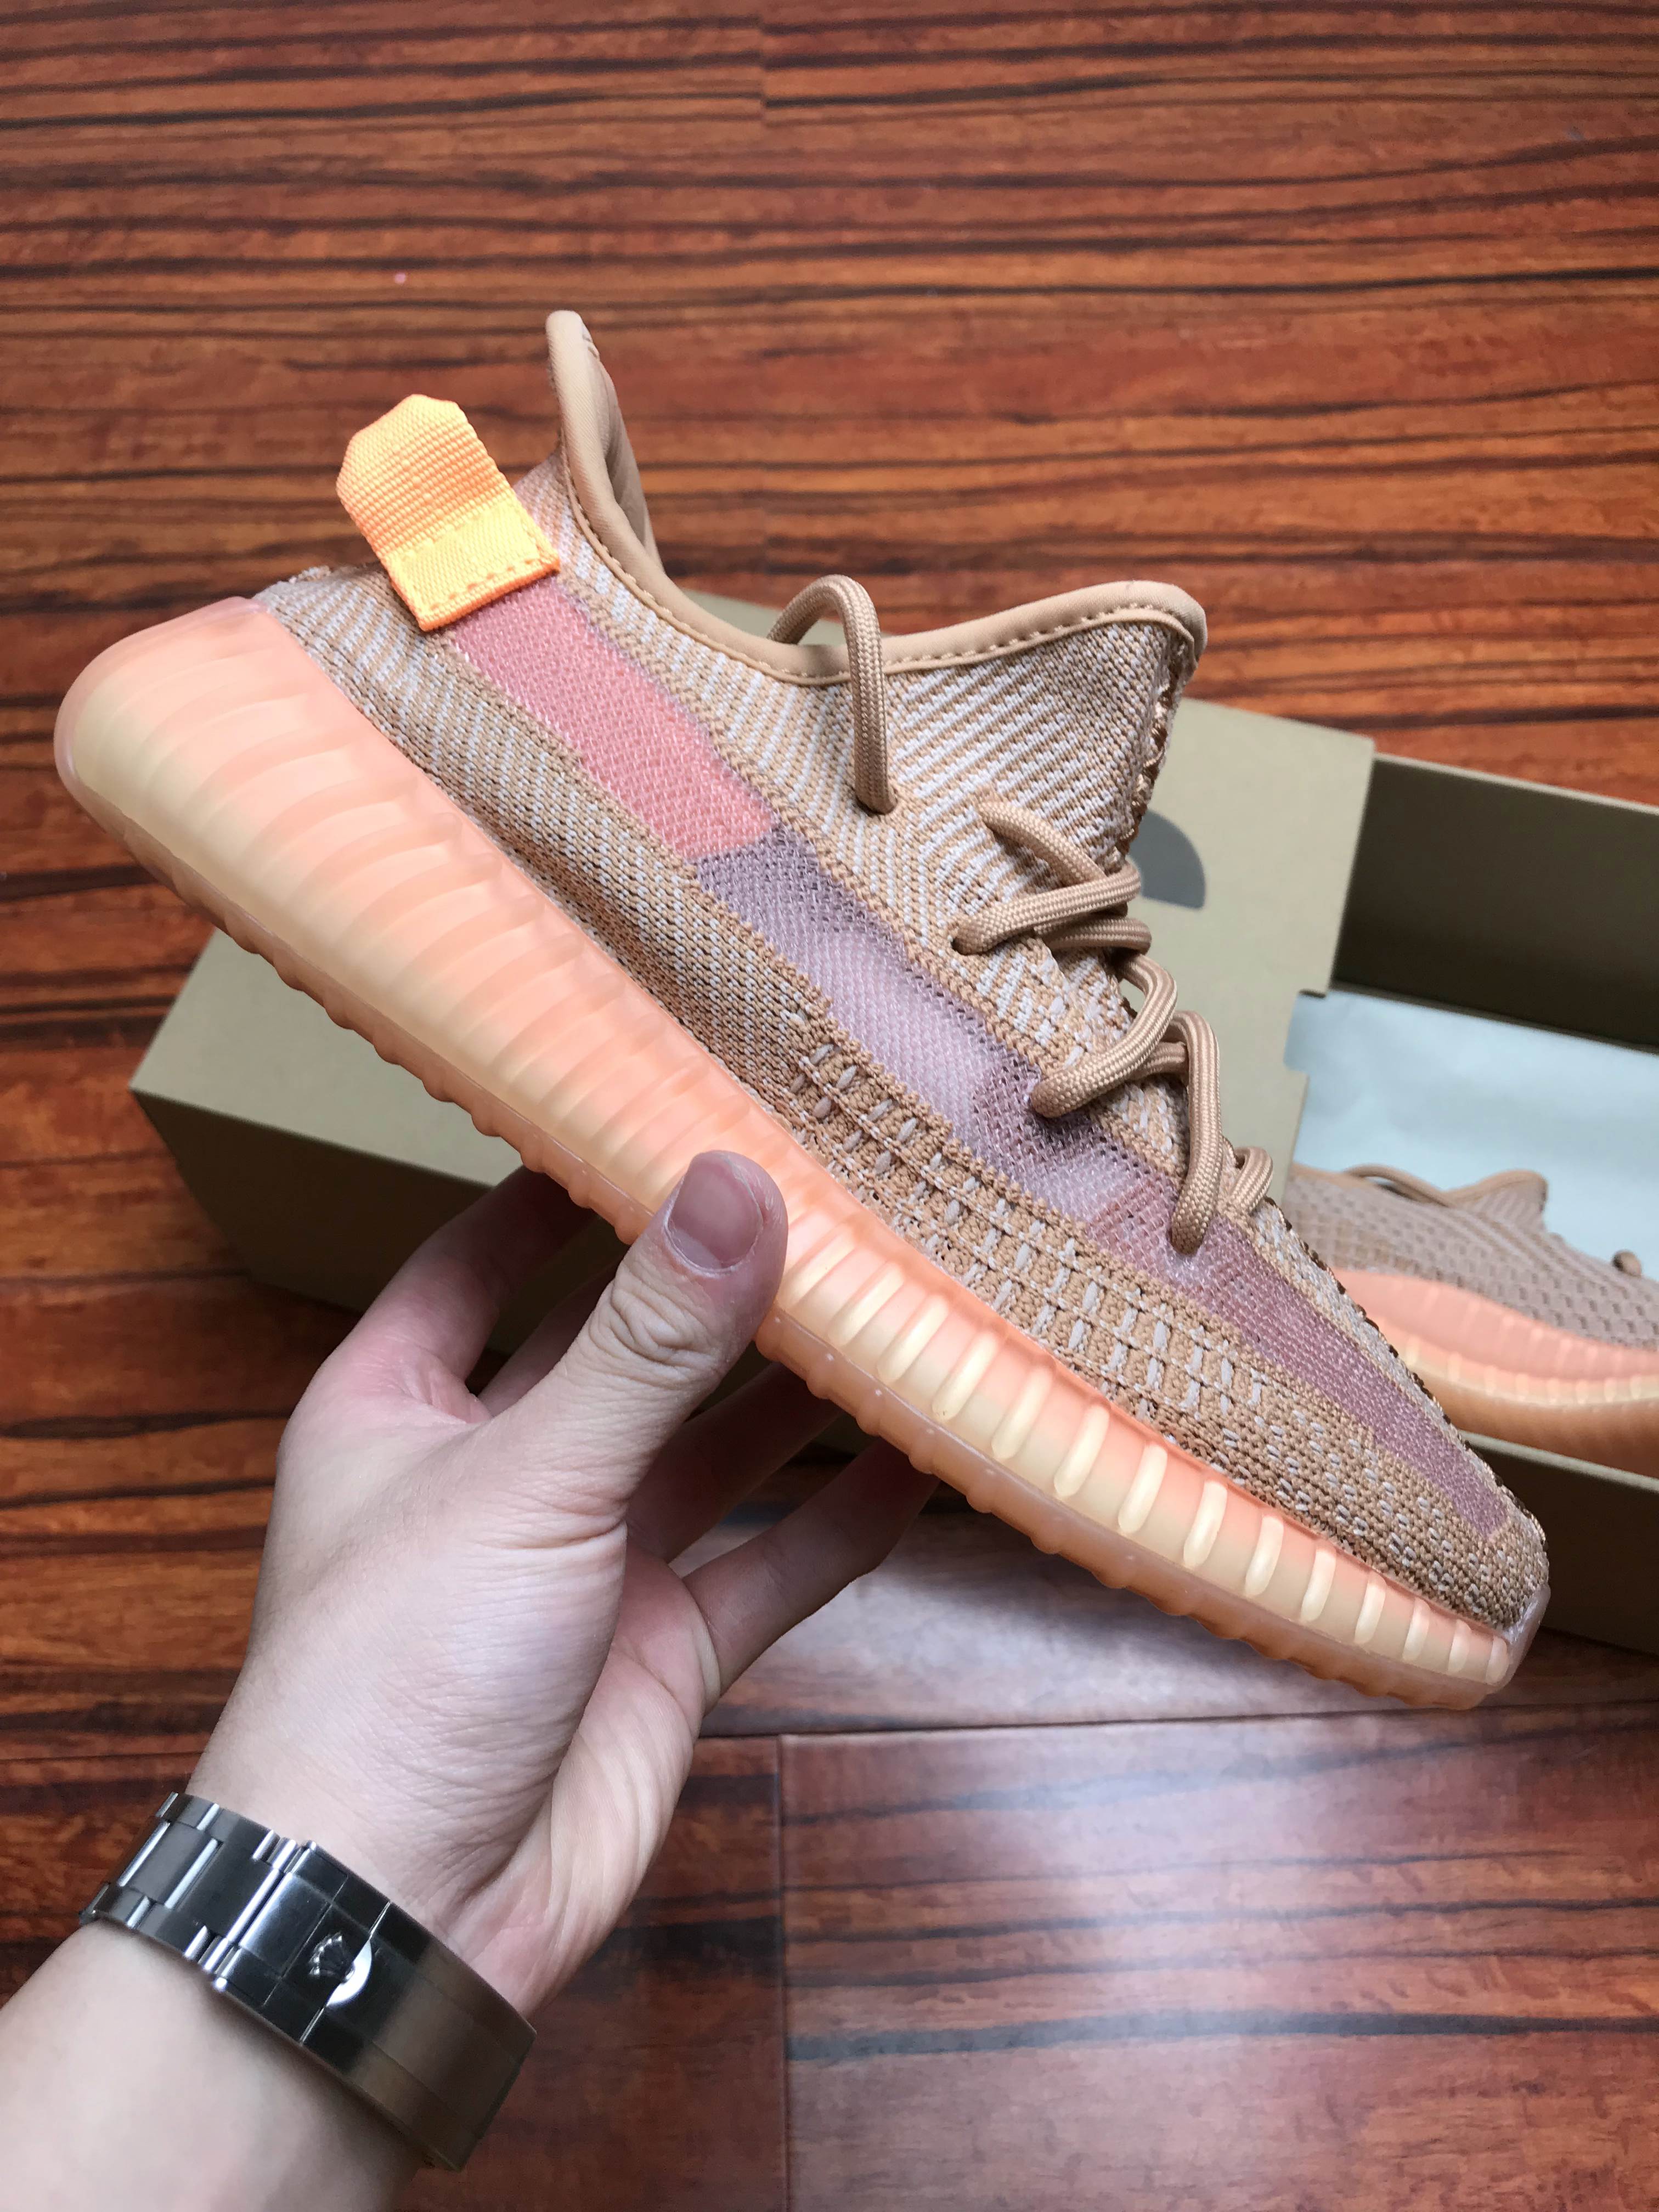 adidas Yeezy Boost 350 V2 “Clay” EG7490 For Sale – Sneaker Hello